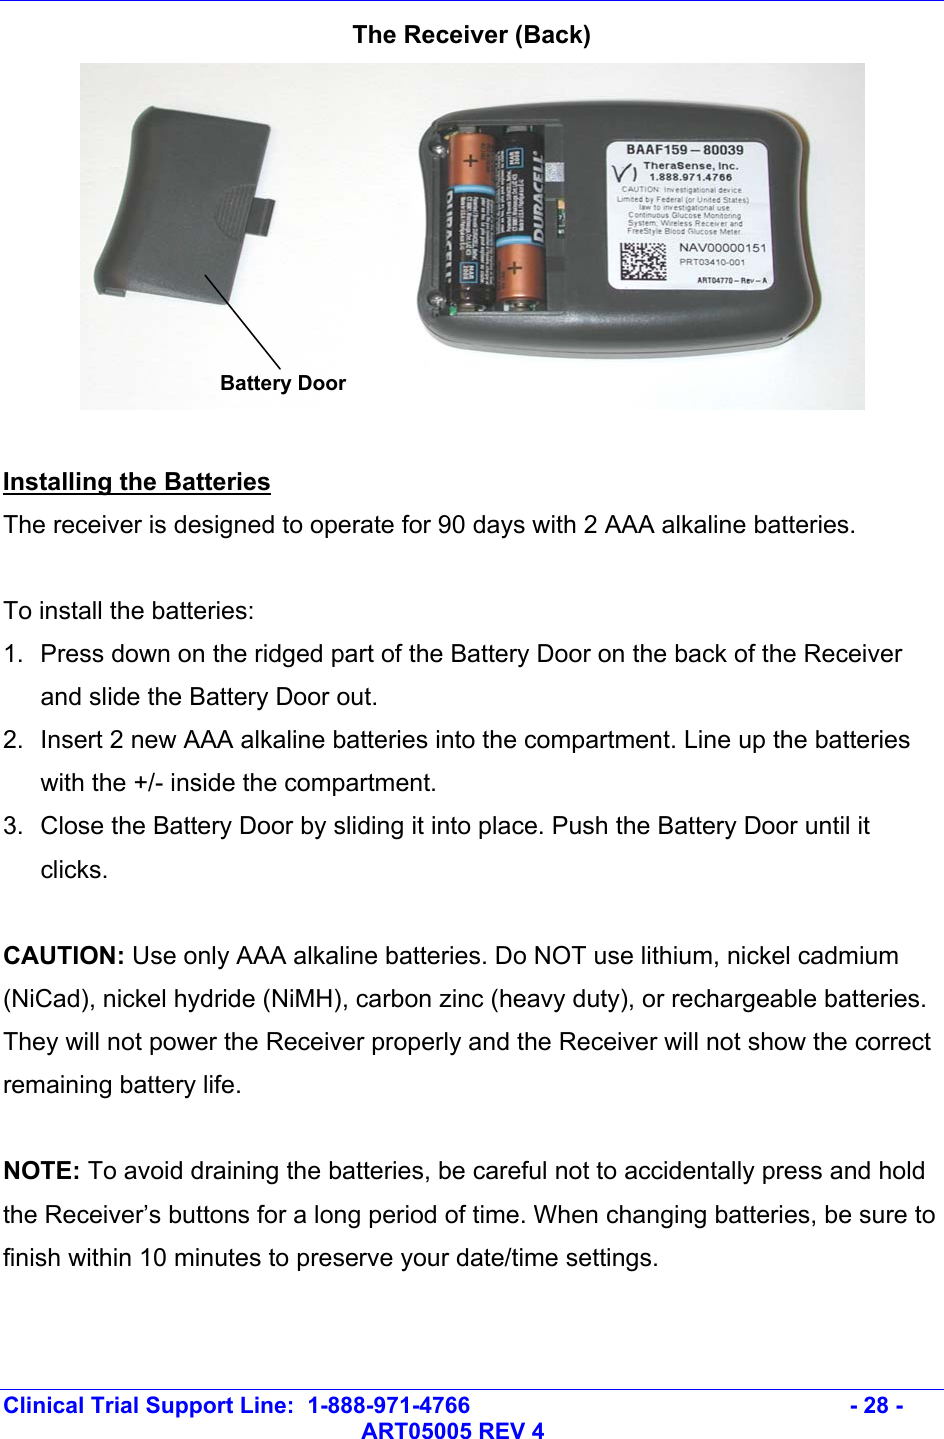   Clinical Trial Support Line:  1-888-971-4766   - 28 -   ART05005 REV 4 The Receiver (Back)   Installing the Batteries The receiver is designed to operate for 90 days with 2 AAA alkaline batteries.   To install the batteries: 1.  Press down on the ridged part of the Battery Door on the back of the Receiver and slide the Battery Door out. 2.  Insert 2 new AAA alkaline batteries into the compartment. Line up the batteries with the +/- inside the compartment. 3.  Close the Battery Door by sliding it into place. Push the Battery Door until it clicks.  CAUTION: Use only AAA alkaline batteries. Do NOT use lithium, nickel cadmium (NiCad), nickel hydride (NiMH), carbon zinc (heavy duty), or rechargeable batteries. They will not power the Receiver properly and the Receiver will not show the correct remaining battery life.   NOTE: To avoid draining the batteries, be careful not to accidentally press and hold the Receiver’s buttons for a long period of time. When changing batteries, be sure to finish within 10 minutes to preserve your date/time settings.  Battery Door 